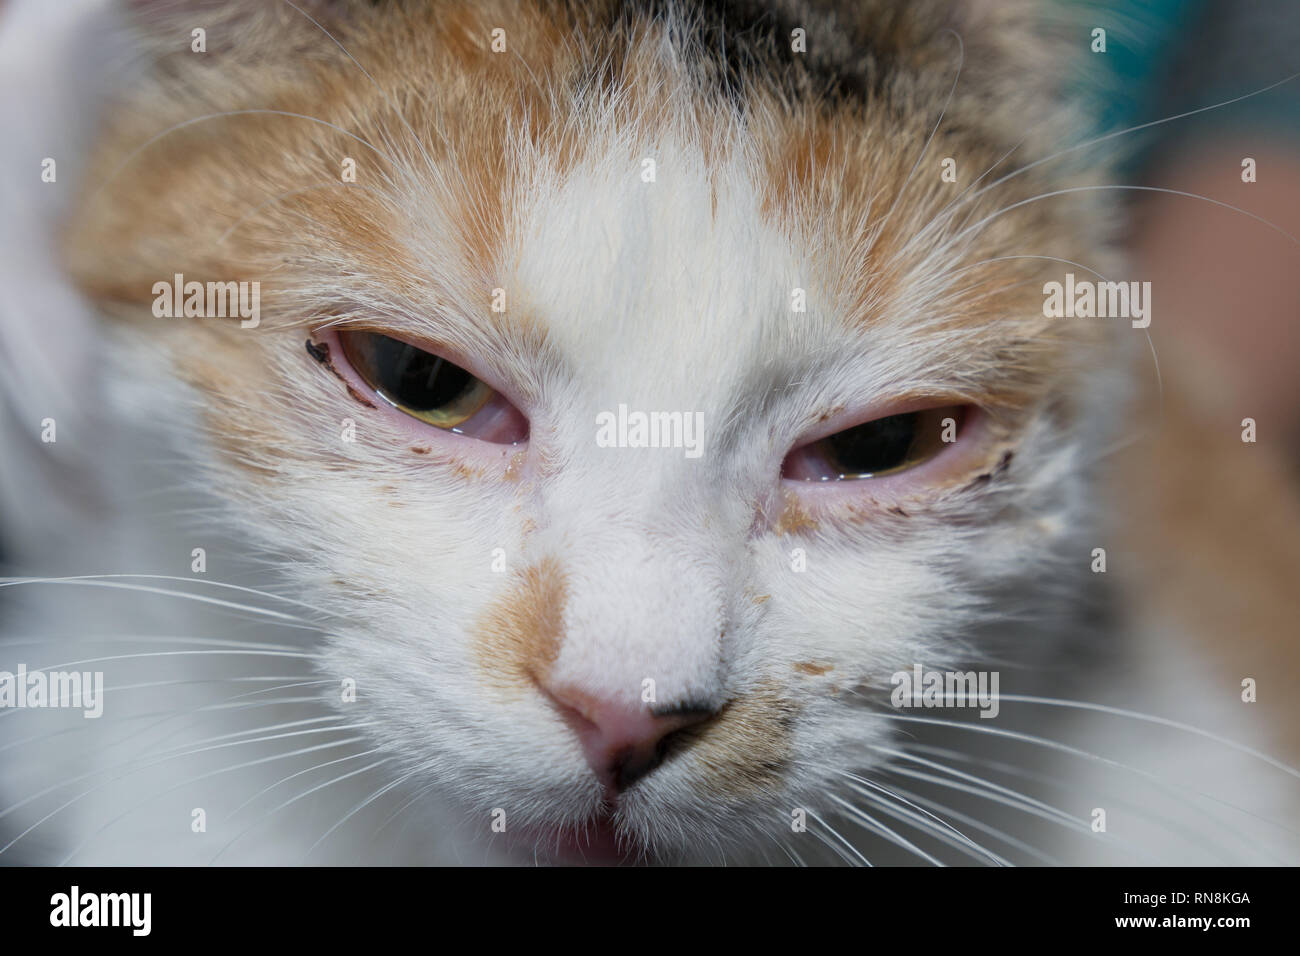 adult cat with herpesvirus infection and purulent conjunctivitis Stock Photo